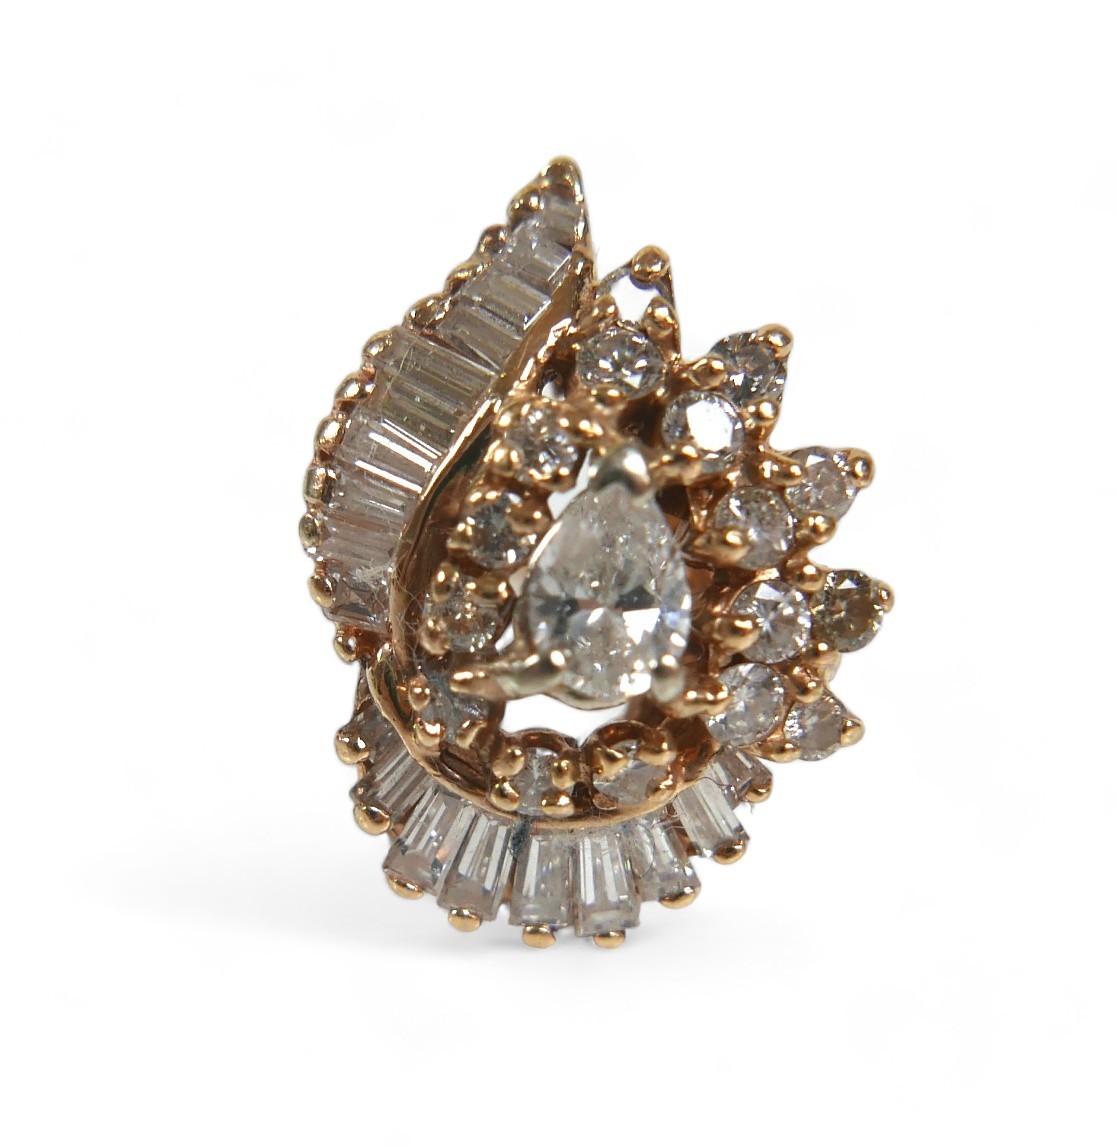 A 14ct yellow gold and diamond cluster dress ring, circa 1970s, set centrally with a pear cut